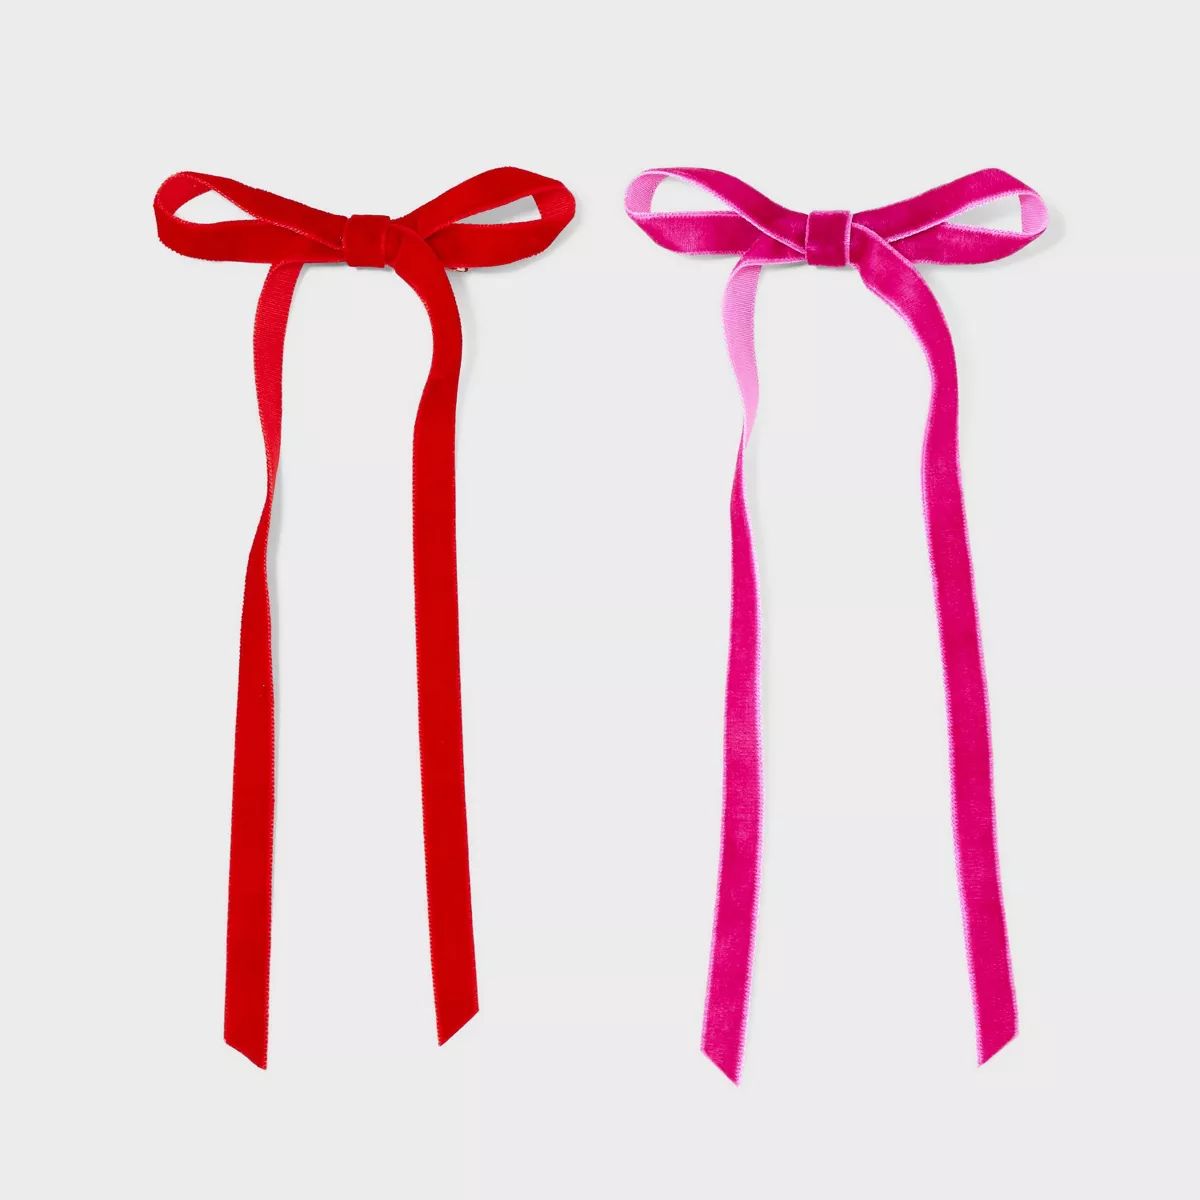 Ribbon Bow Hair Clips 2pc - A New Day™ Pink/Red | Target